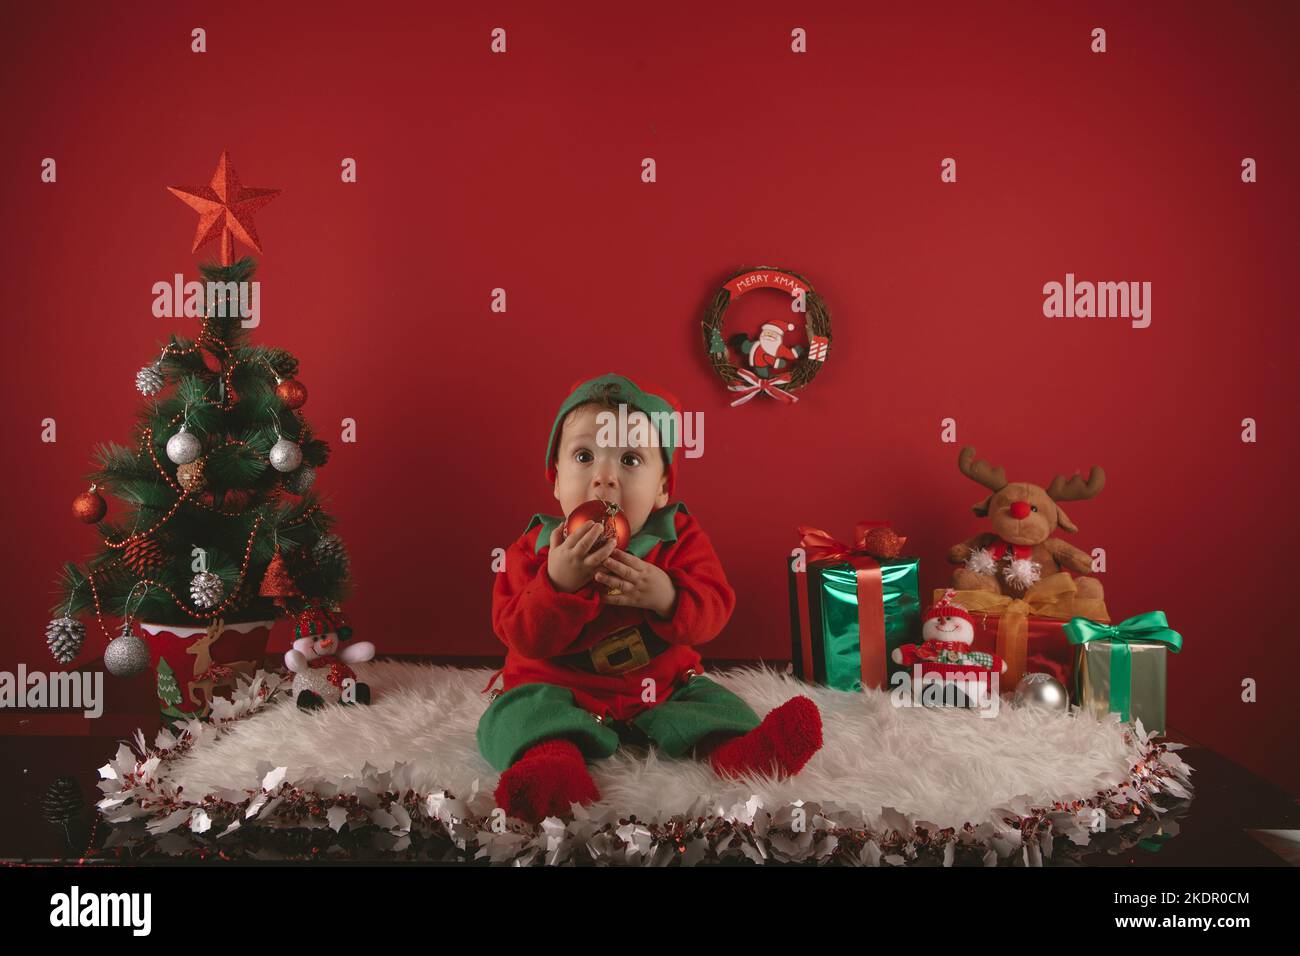 photo of a nice boy dressed as an elf next to a Christmas decoration with a tree and gifts Stock Photo